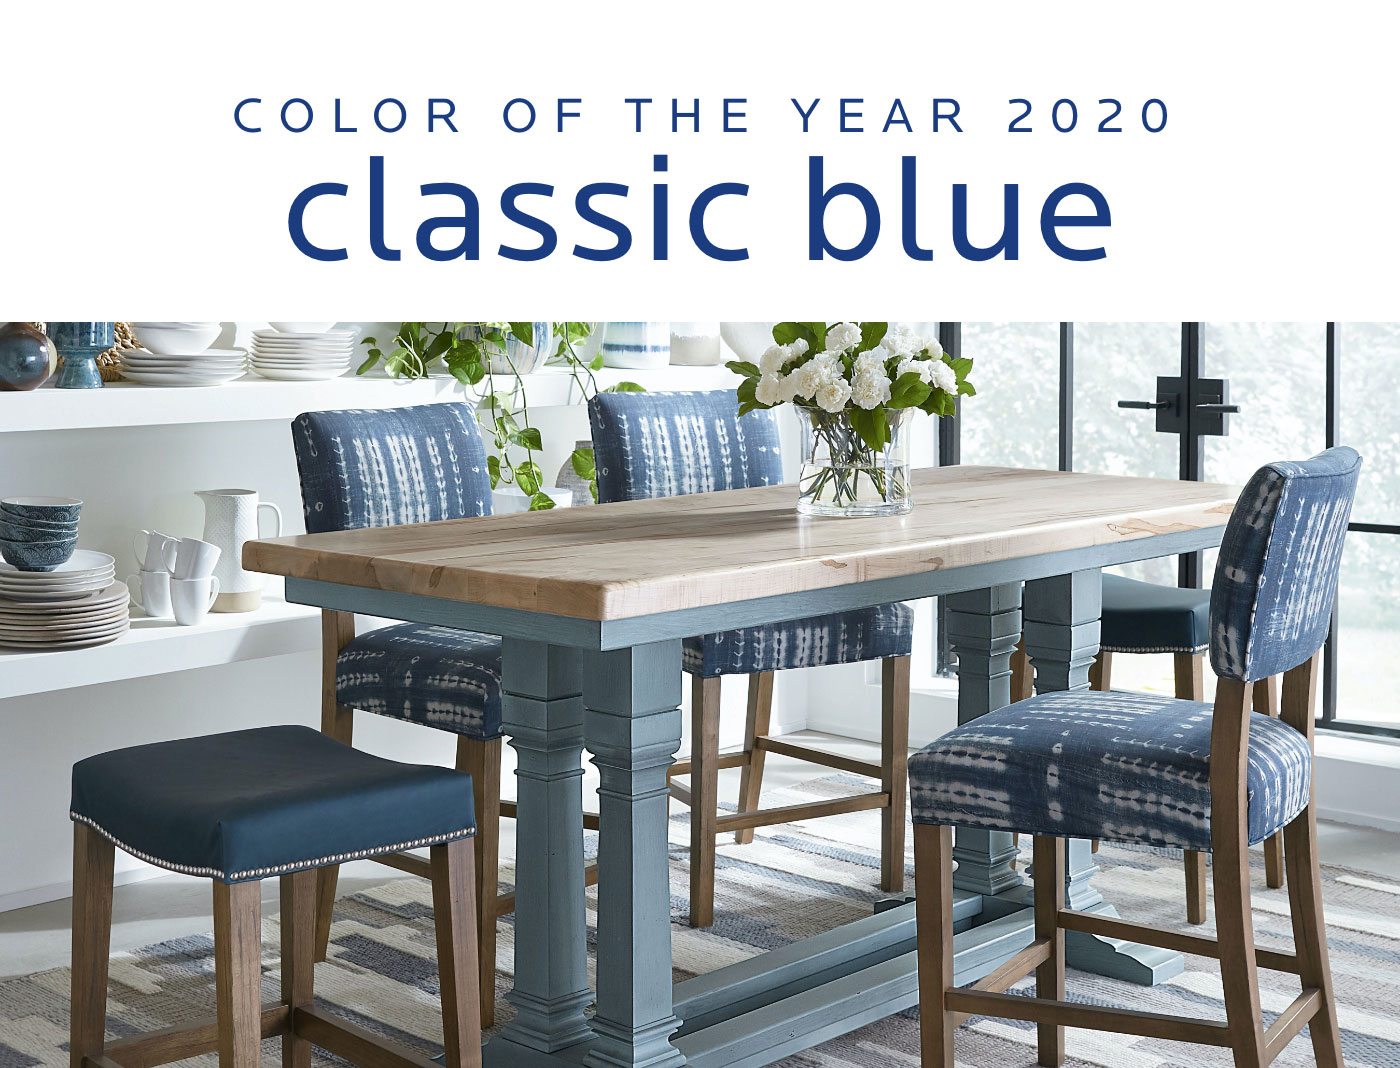 Color of the year 2020. Classic blue.